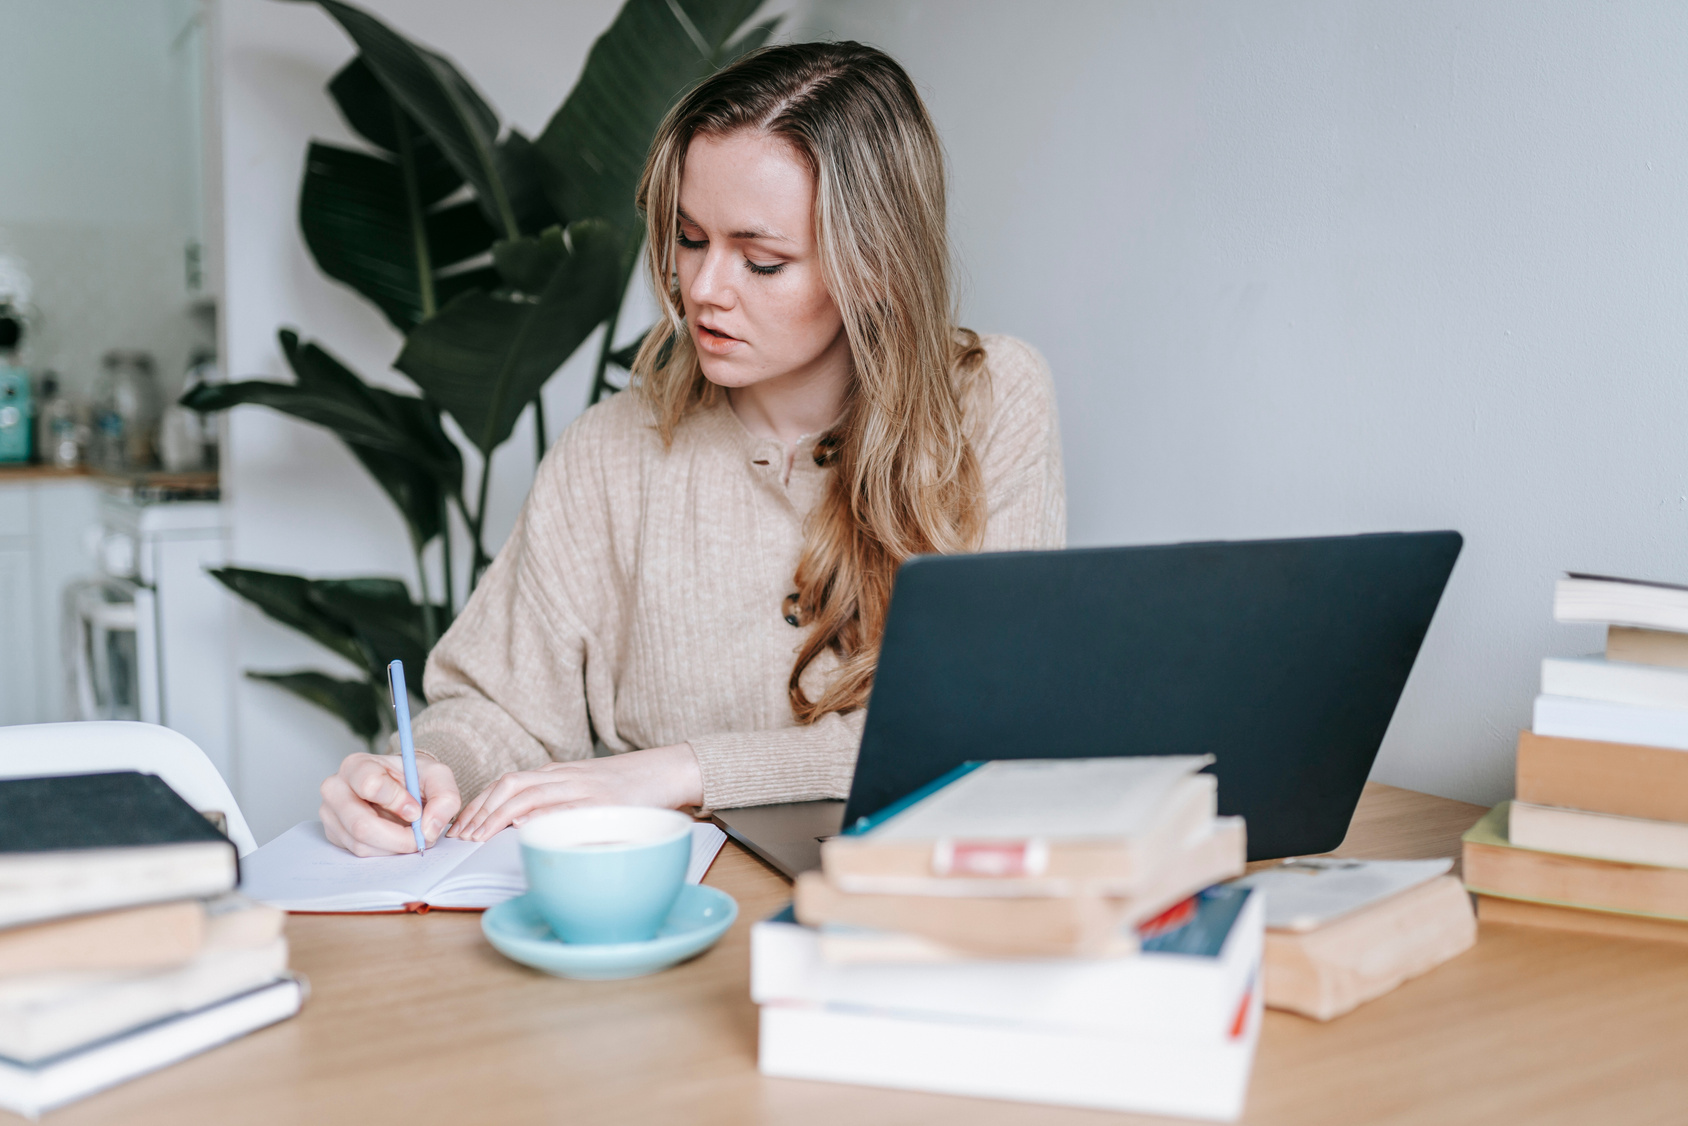 Pensive businesswoman writing information in notebook near laptop and coffee